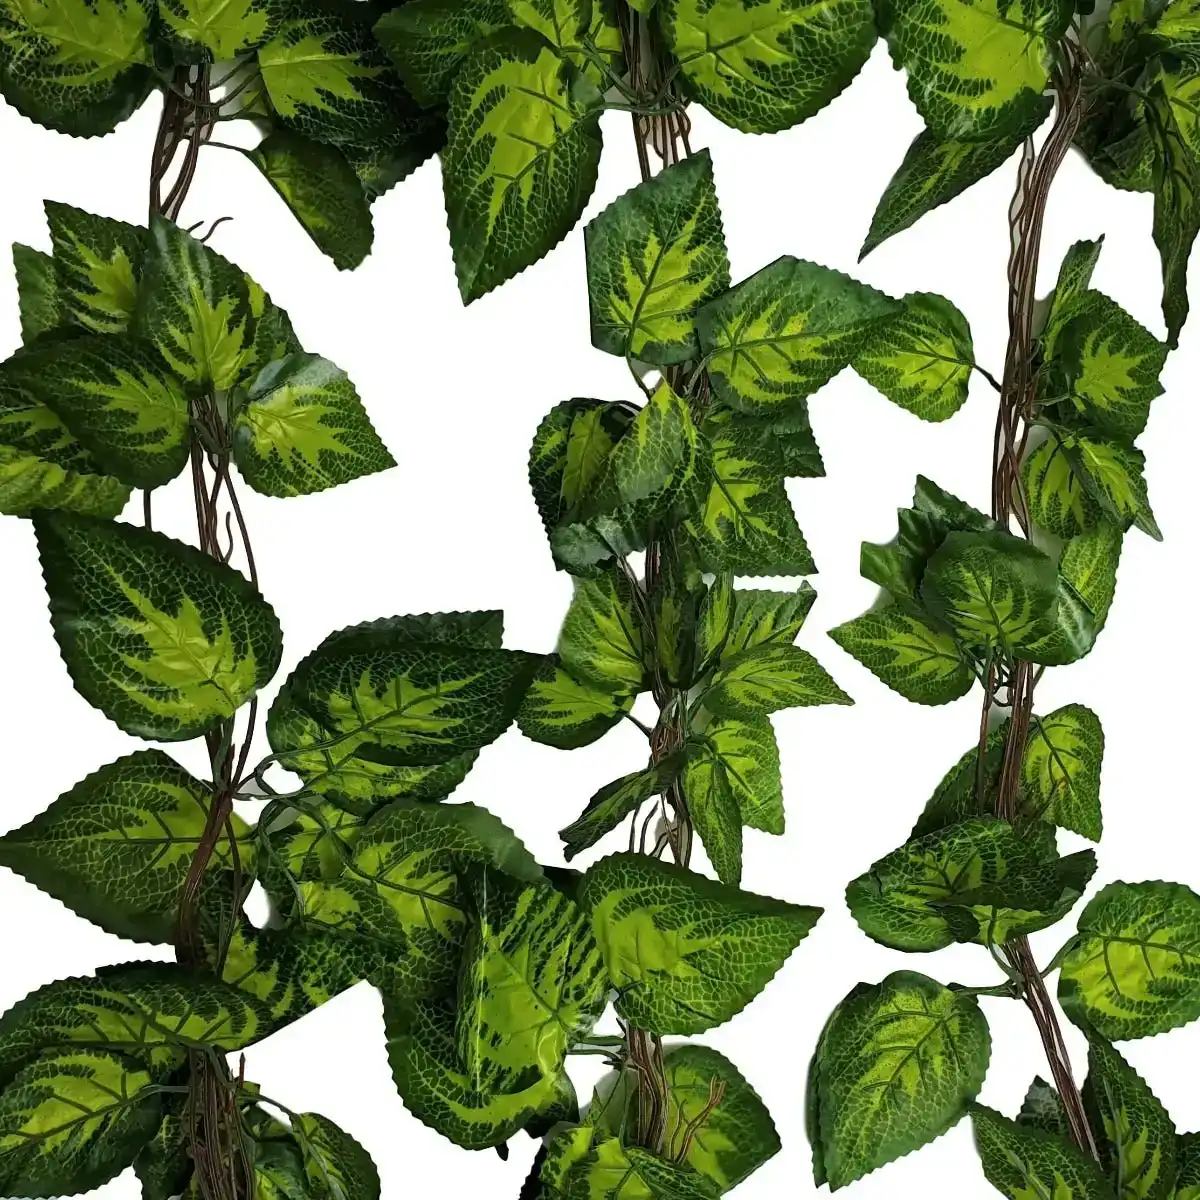 Artificial Pothos / Ivy Hanging Vines 260Cm Each (5 Pack) - One Size